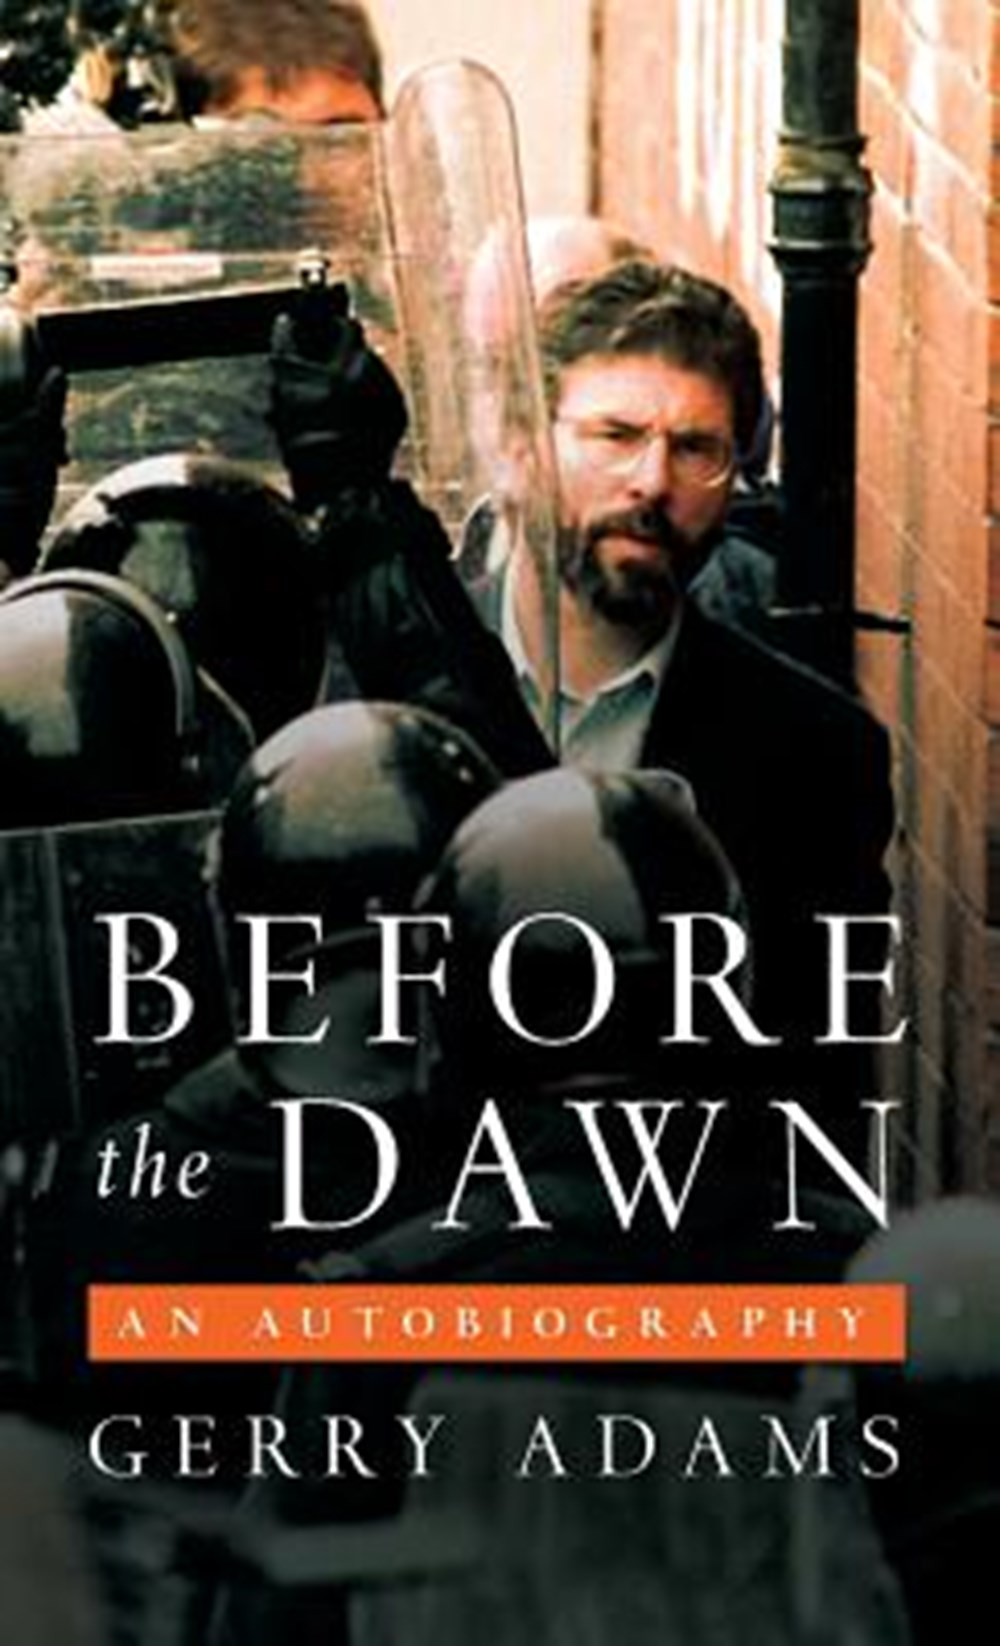 Before the Dawn An Autobiography